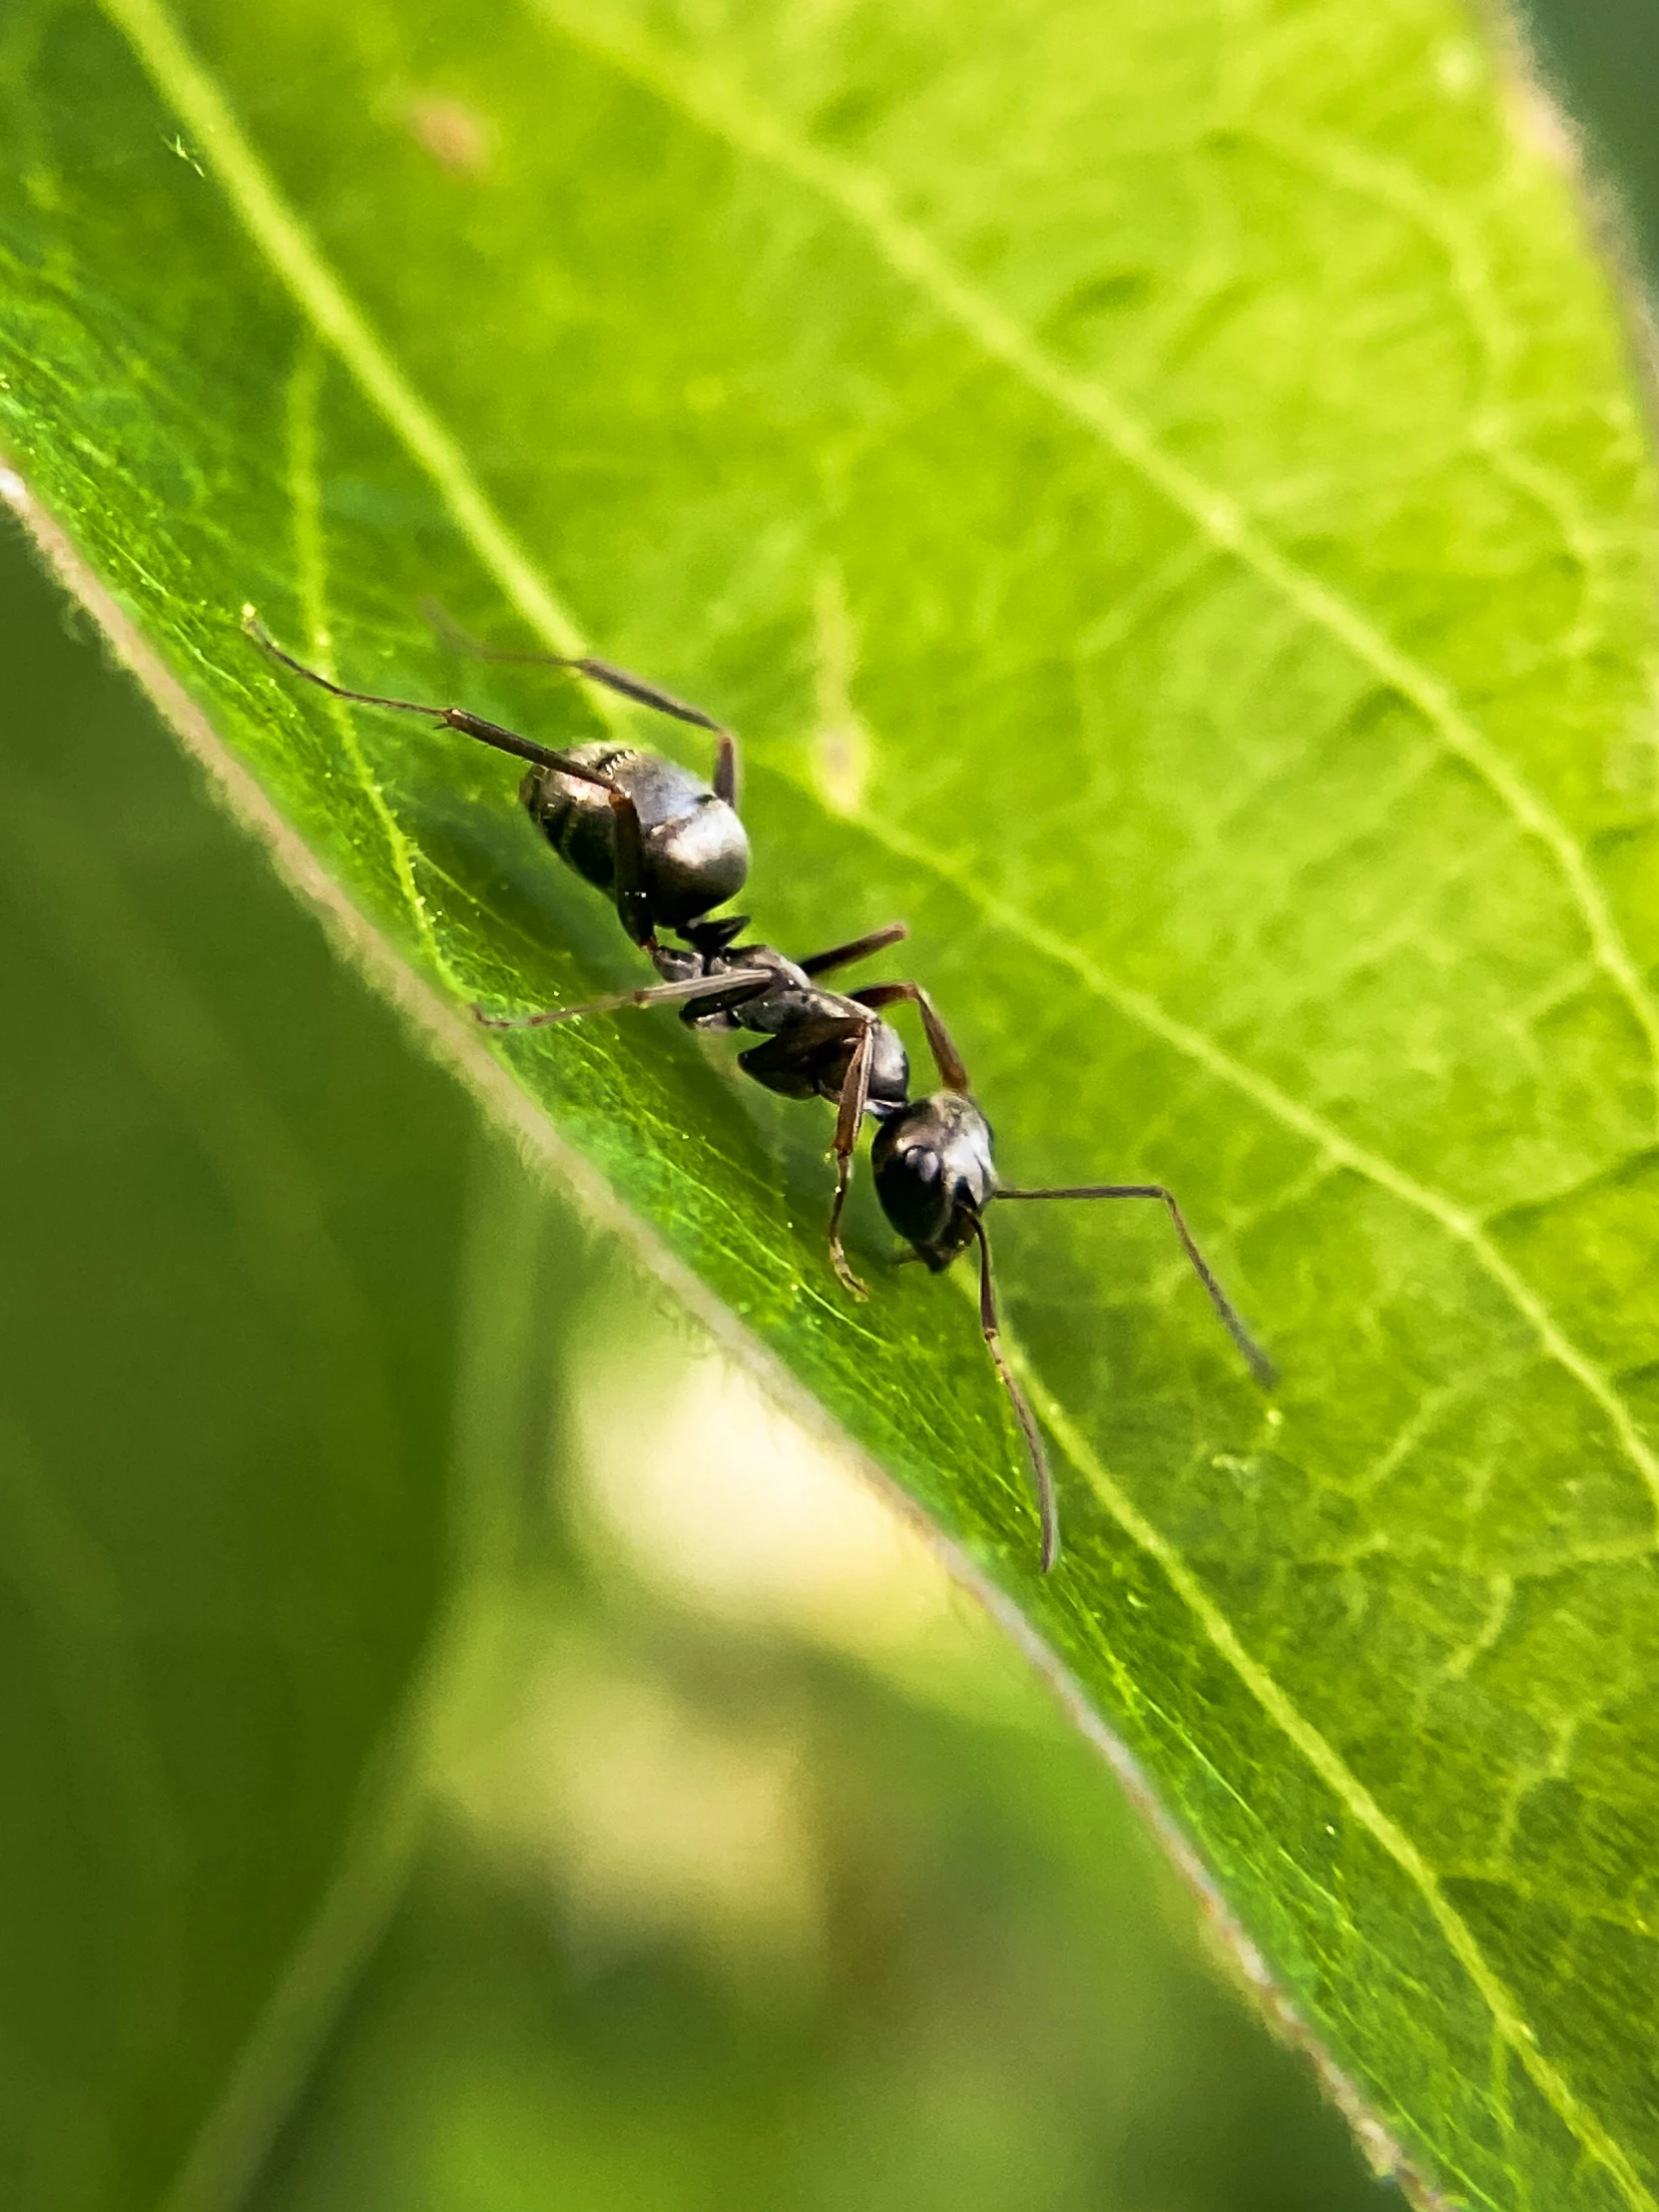 two ants with long legs walking on green leaves